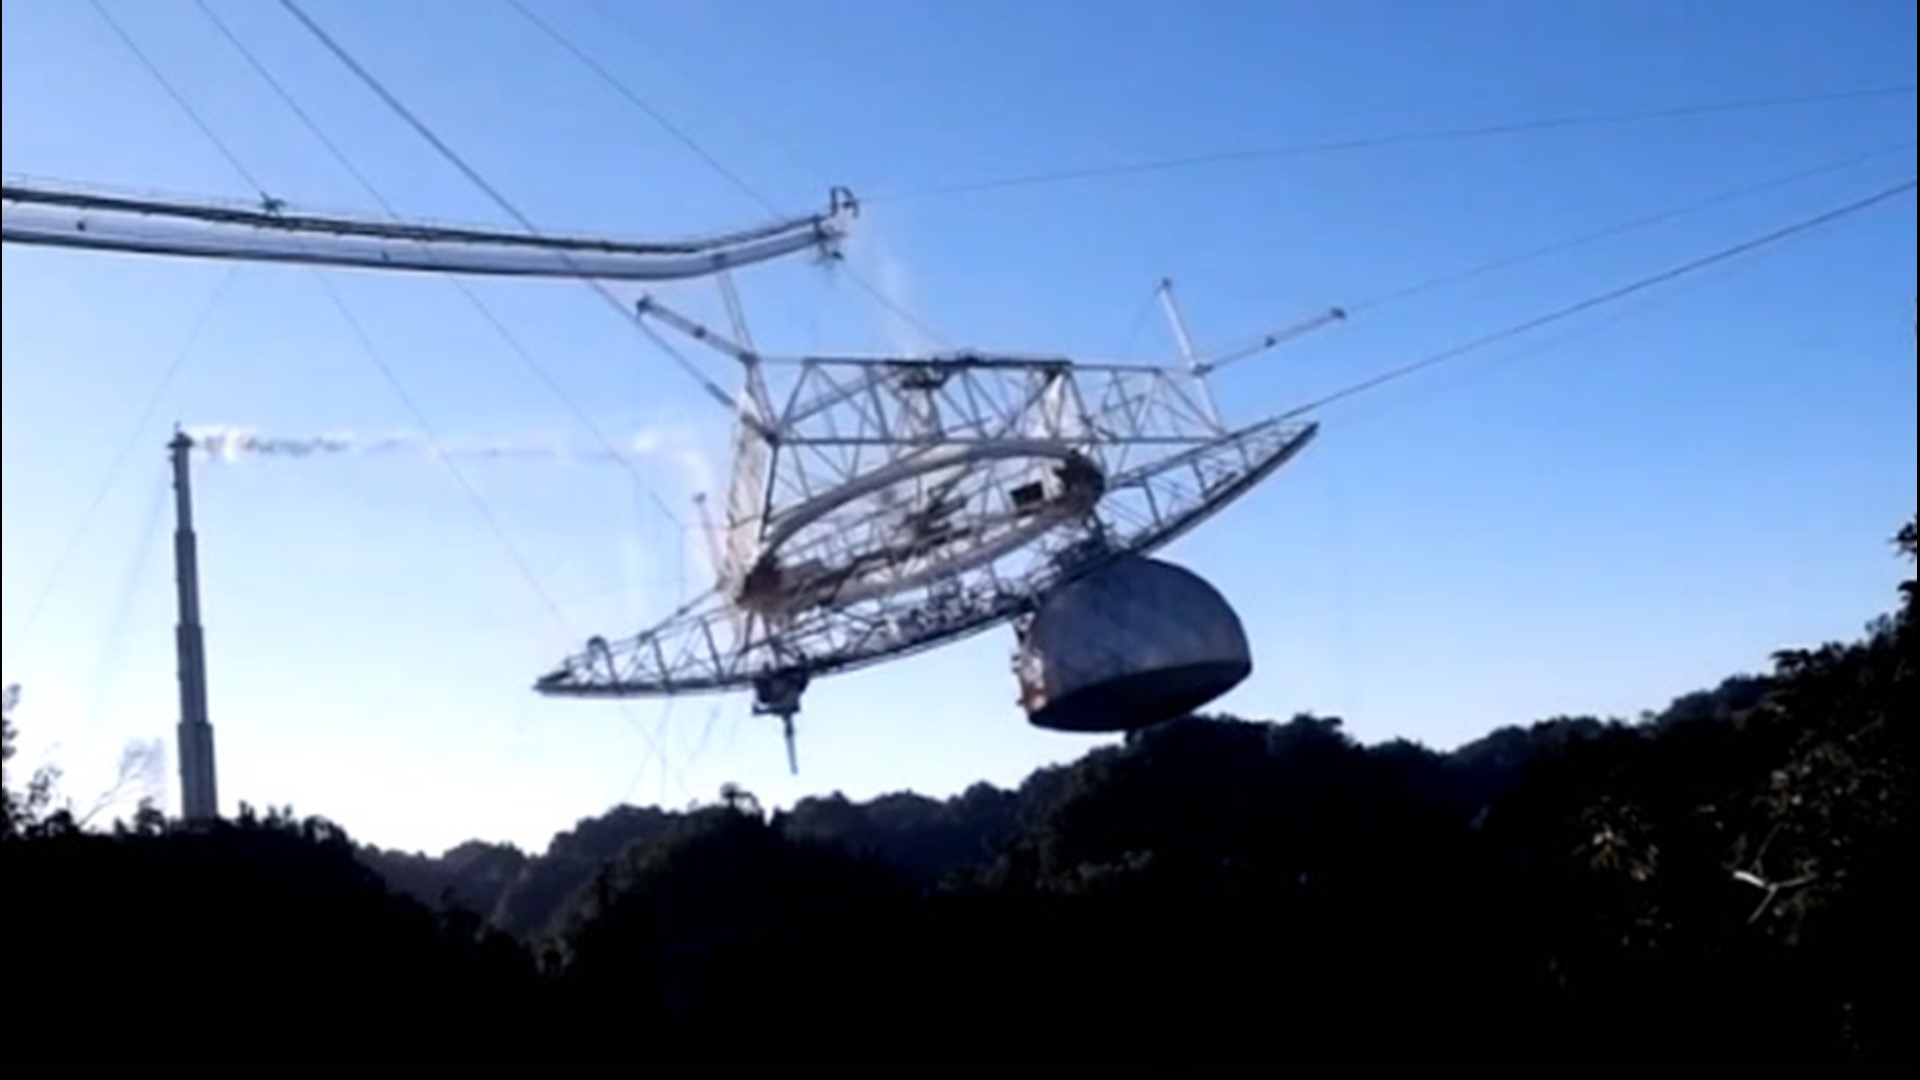 This video from the U.S. National Science Foundation captures the moment the Arecibo Radio Telescope in Puerto Rico collapsed on Dec. 1, ending its 57 years in service.